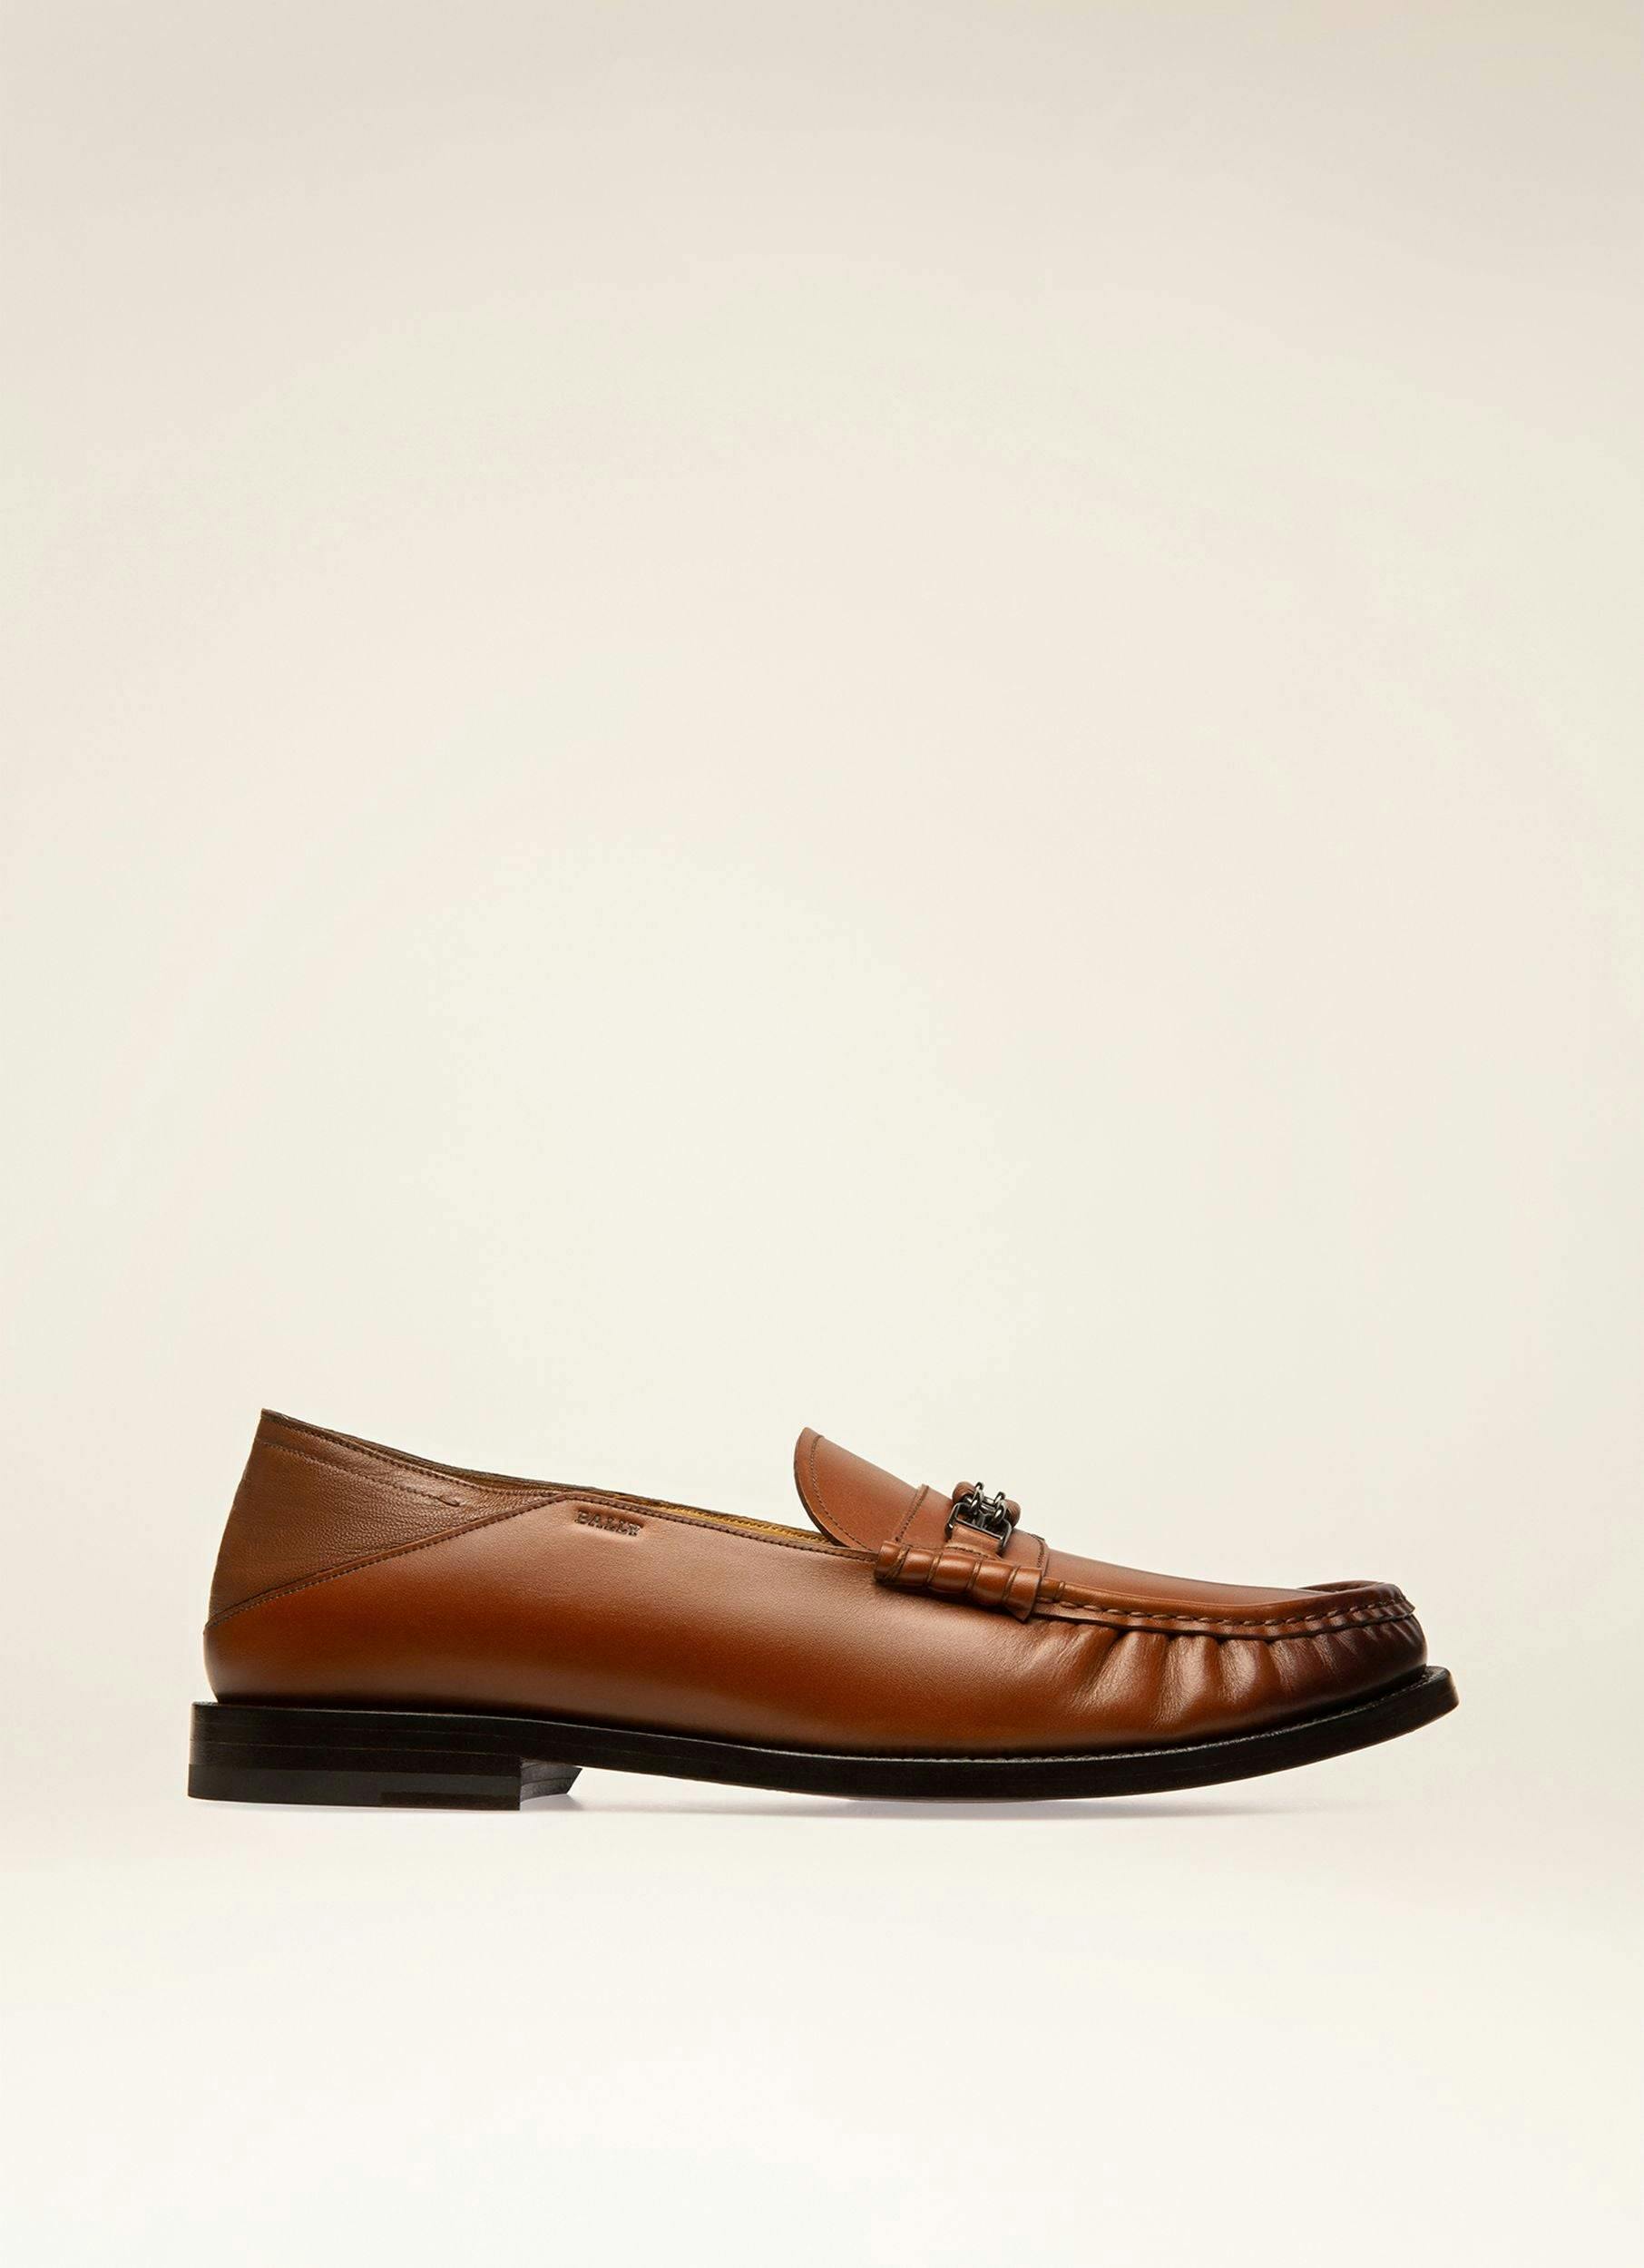 Coriano Leather Moccasins In Brown - Men's - Bally - 01